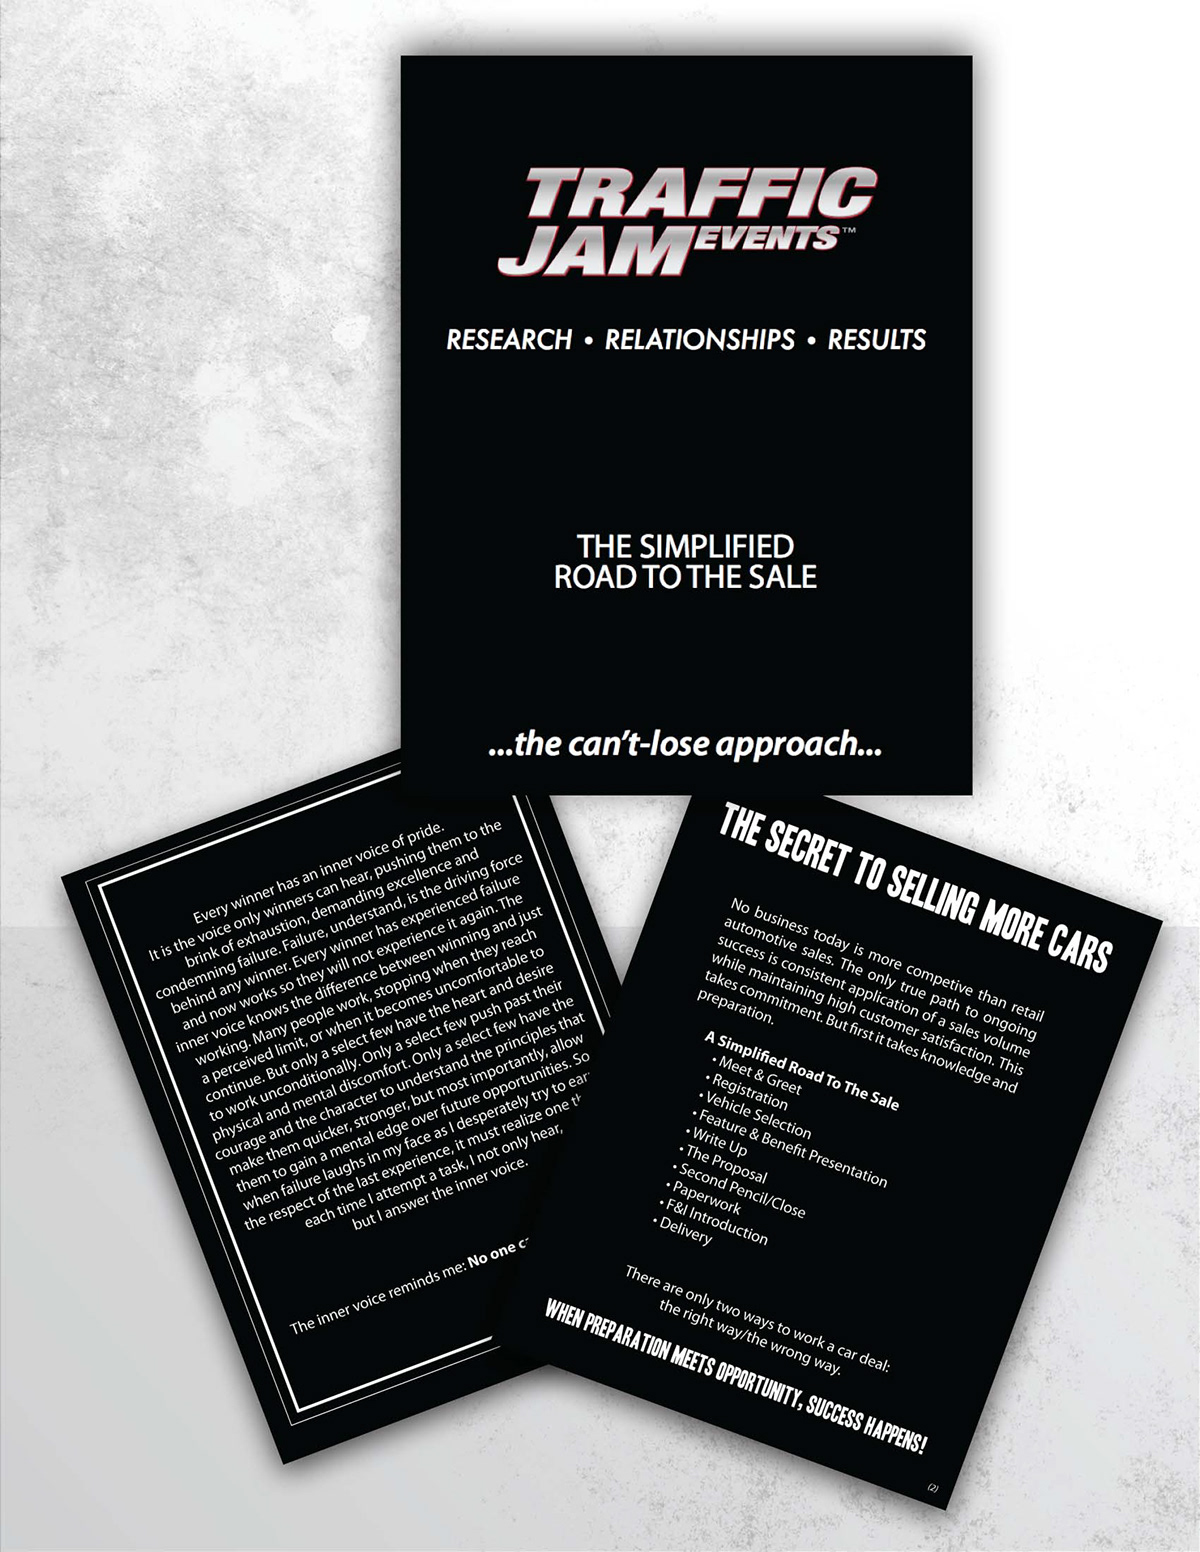 Direct mail traffic jam events